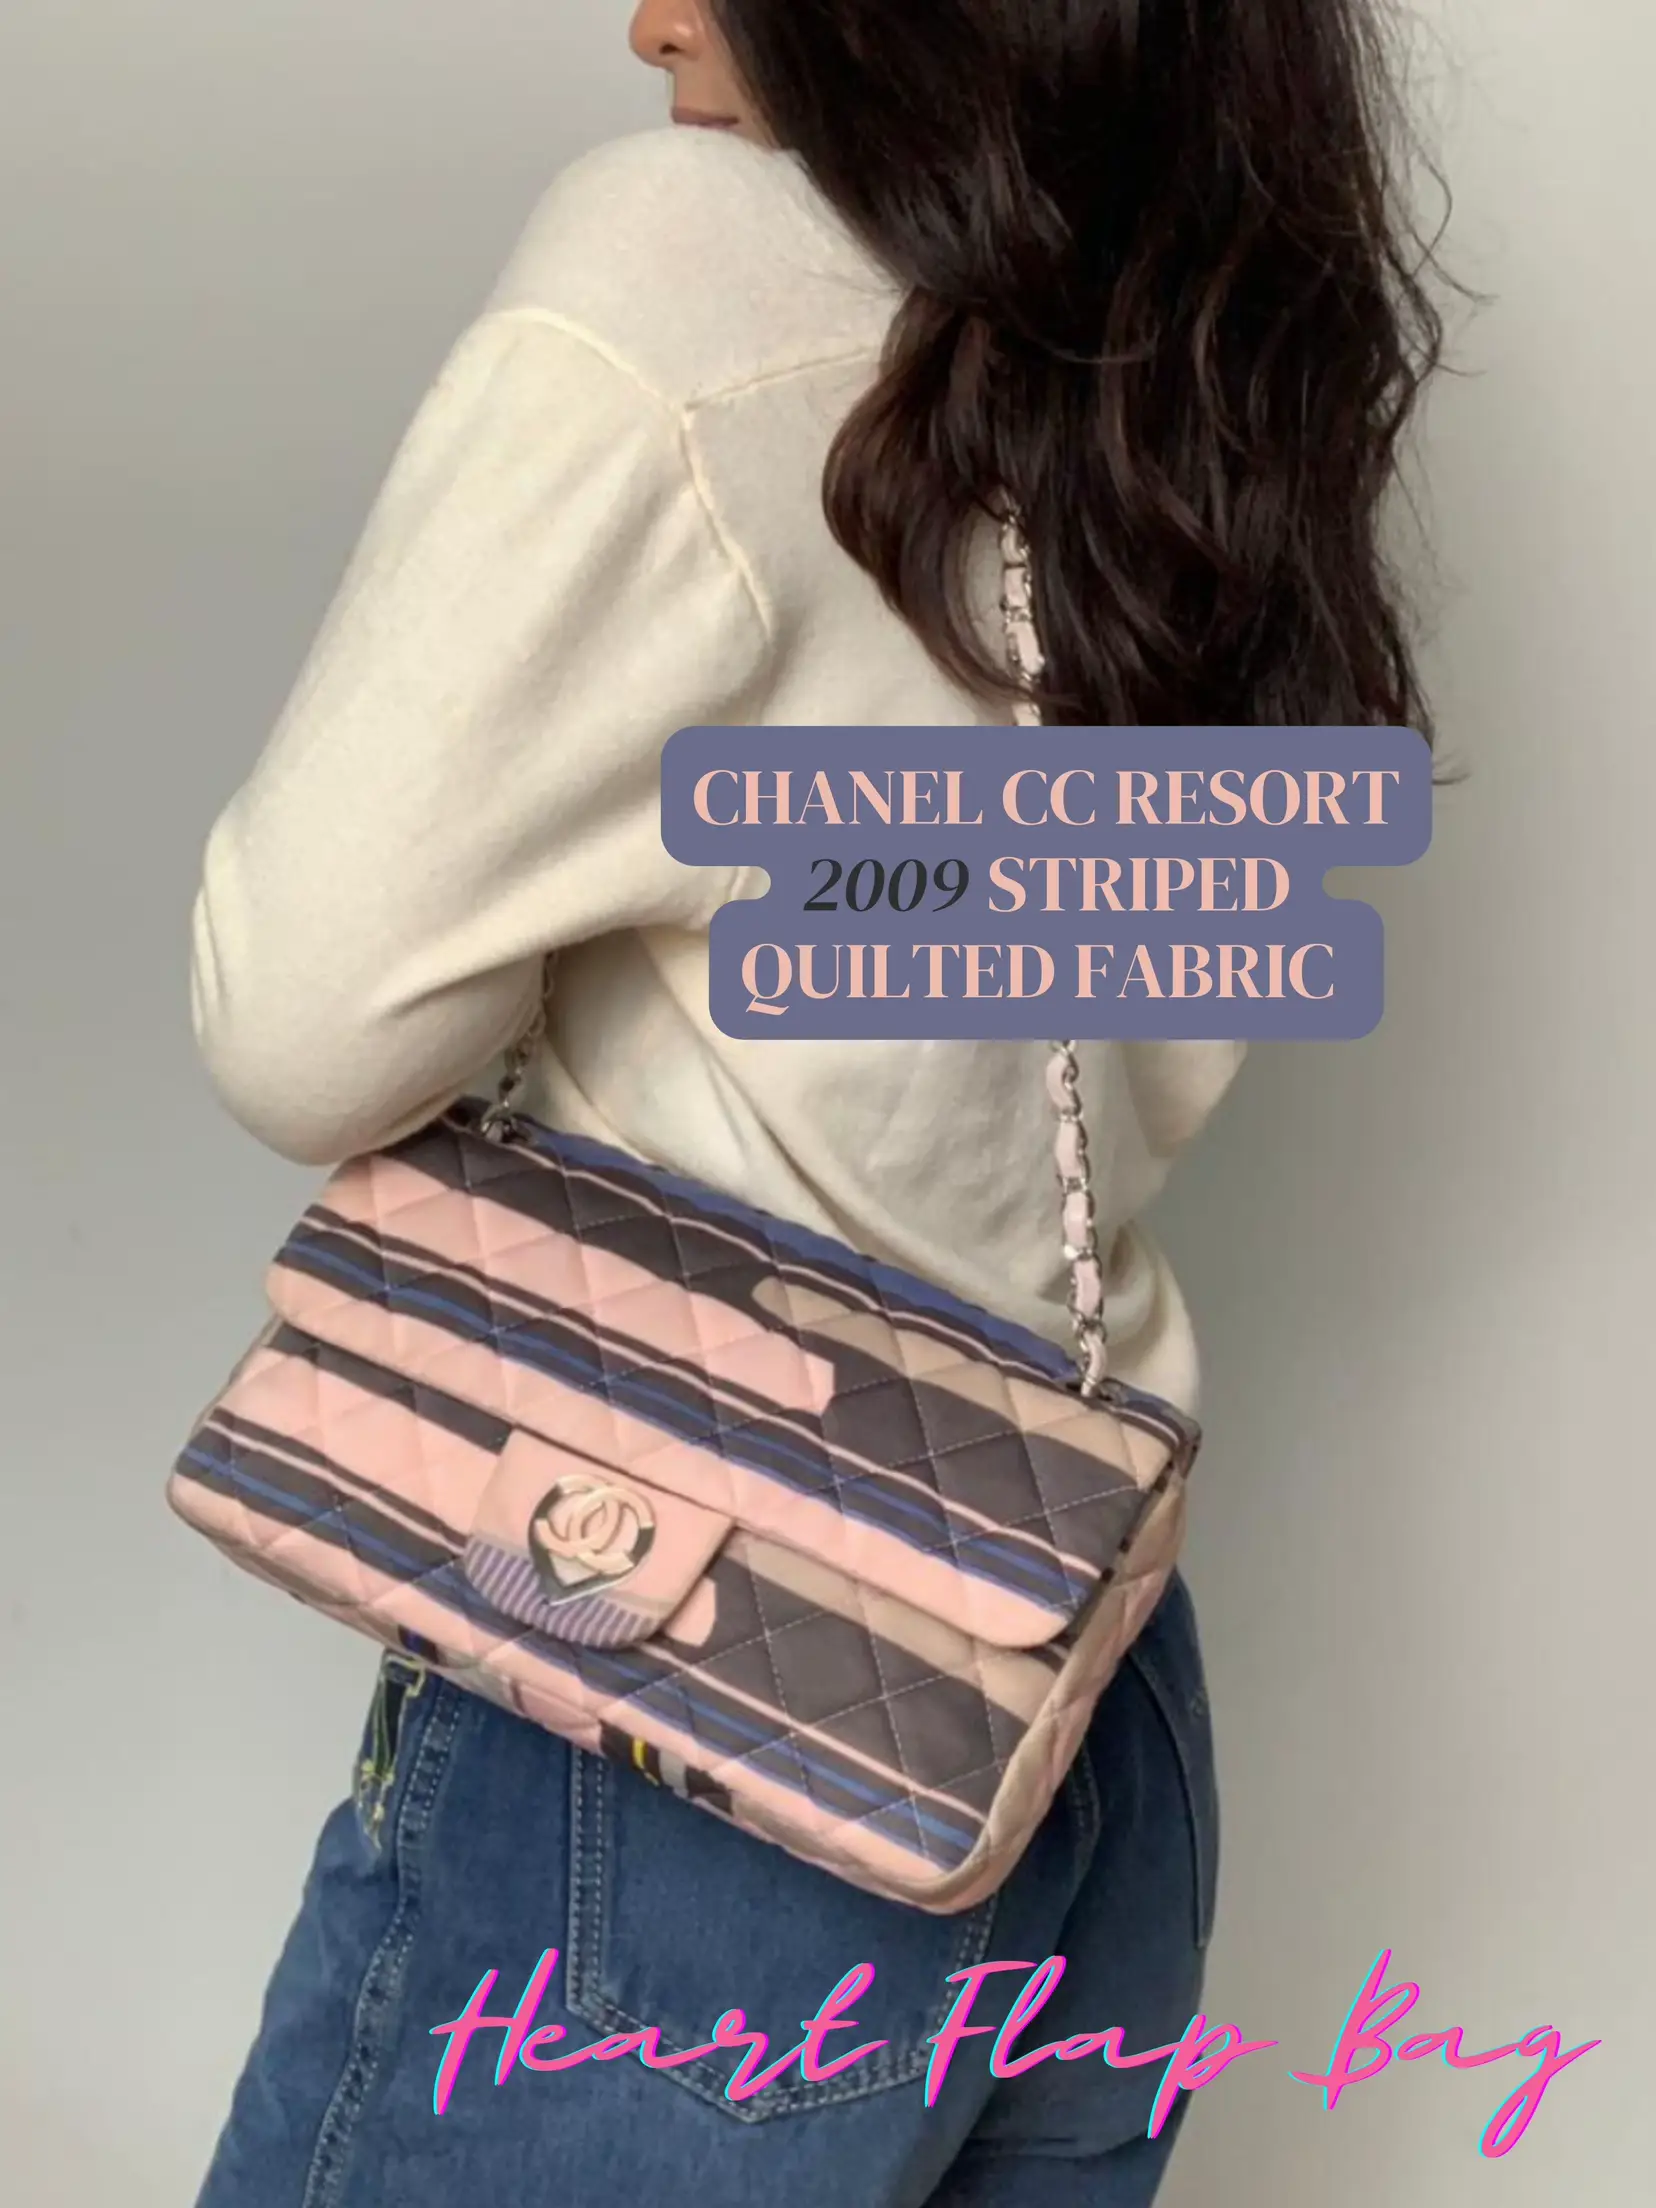 CHANEL Shoulder Bag Striped Bags & Handbags for Women, Authenticity  Guaranteed